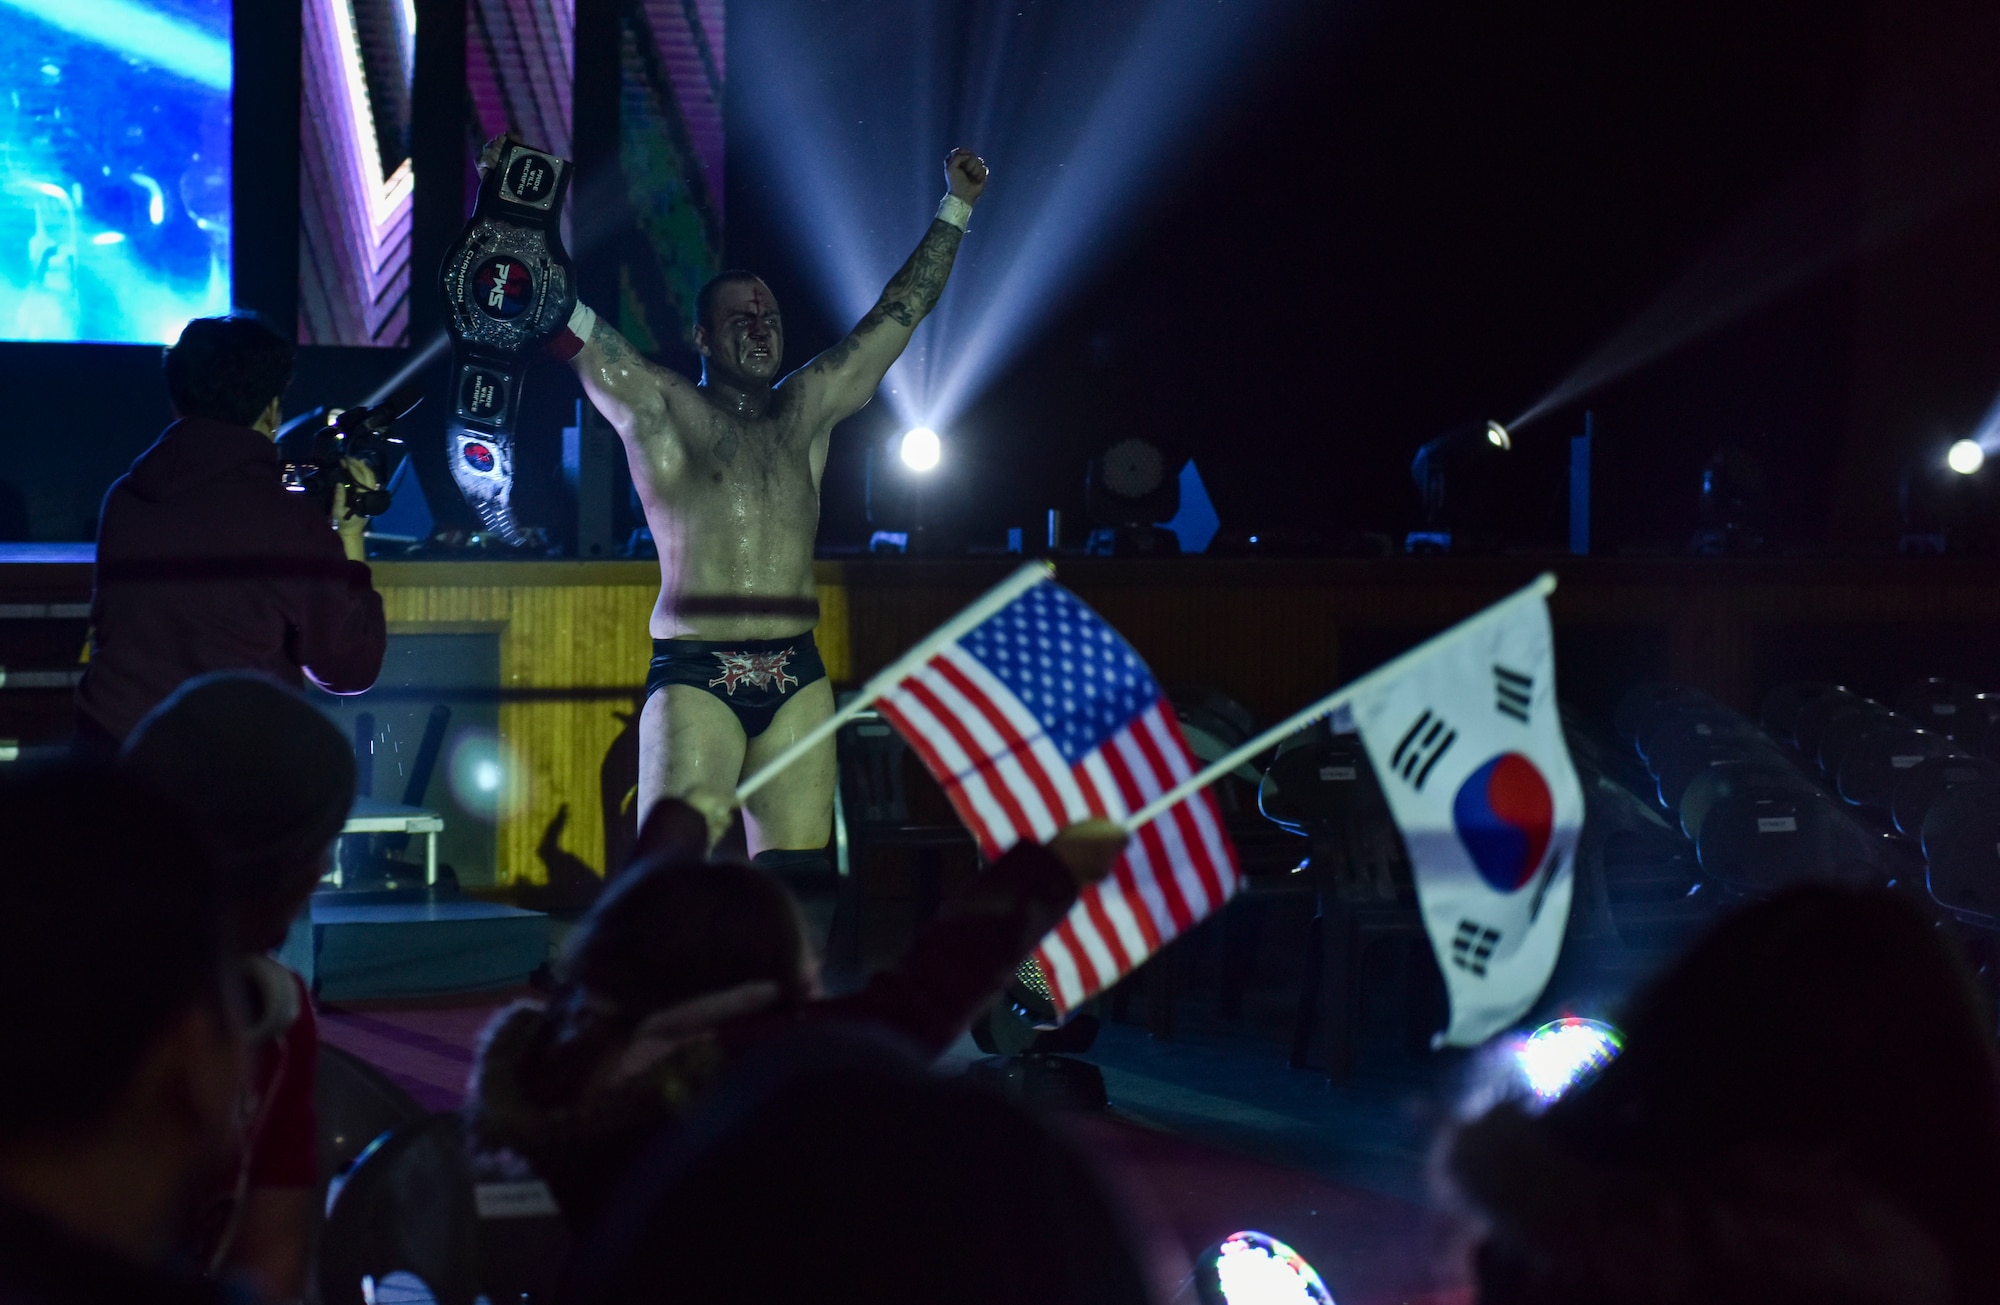 U.S. Air Force Tech. Sgt. Gregory Gauntt, 8th Logistics Readiness Squadron non-commissioned officer in charge of fuels knowledge operations, celebrates after winning a wrestling match in Pyeongtaek, Republic of Korea, Feb. 9, 2019. Gauntt goes by the name Ryan Oshun for professional wrestling and is currently one of two heavyweight champions on the Korean Peninsula. (U.S. Air Force photo by Senior Airman Stefan Alvarez)